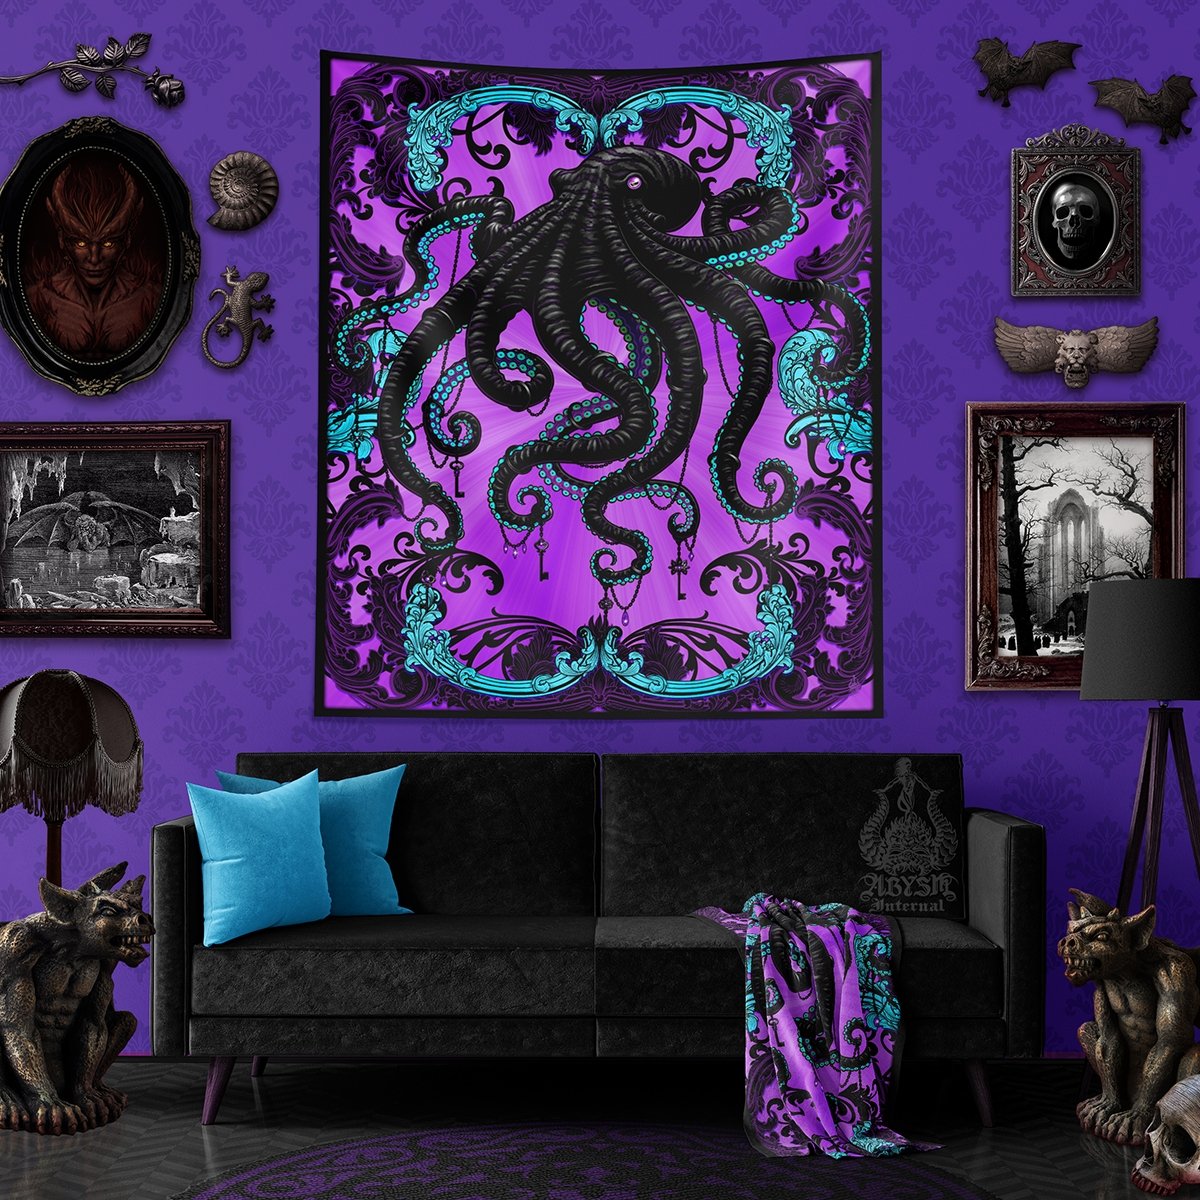 Pastel Goth Tapestry, Octopus Ocean and Beach Home Decor, Art Print - Gothic - Abysm Internal